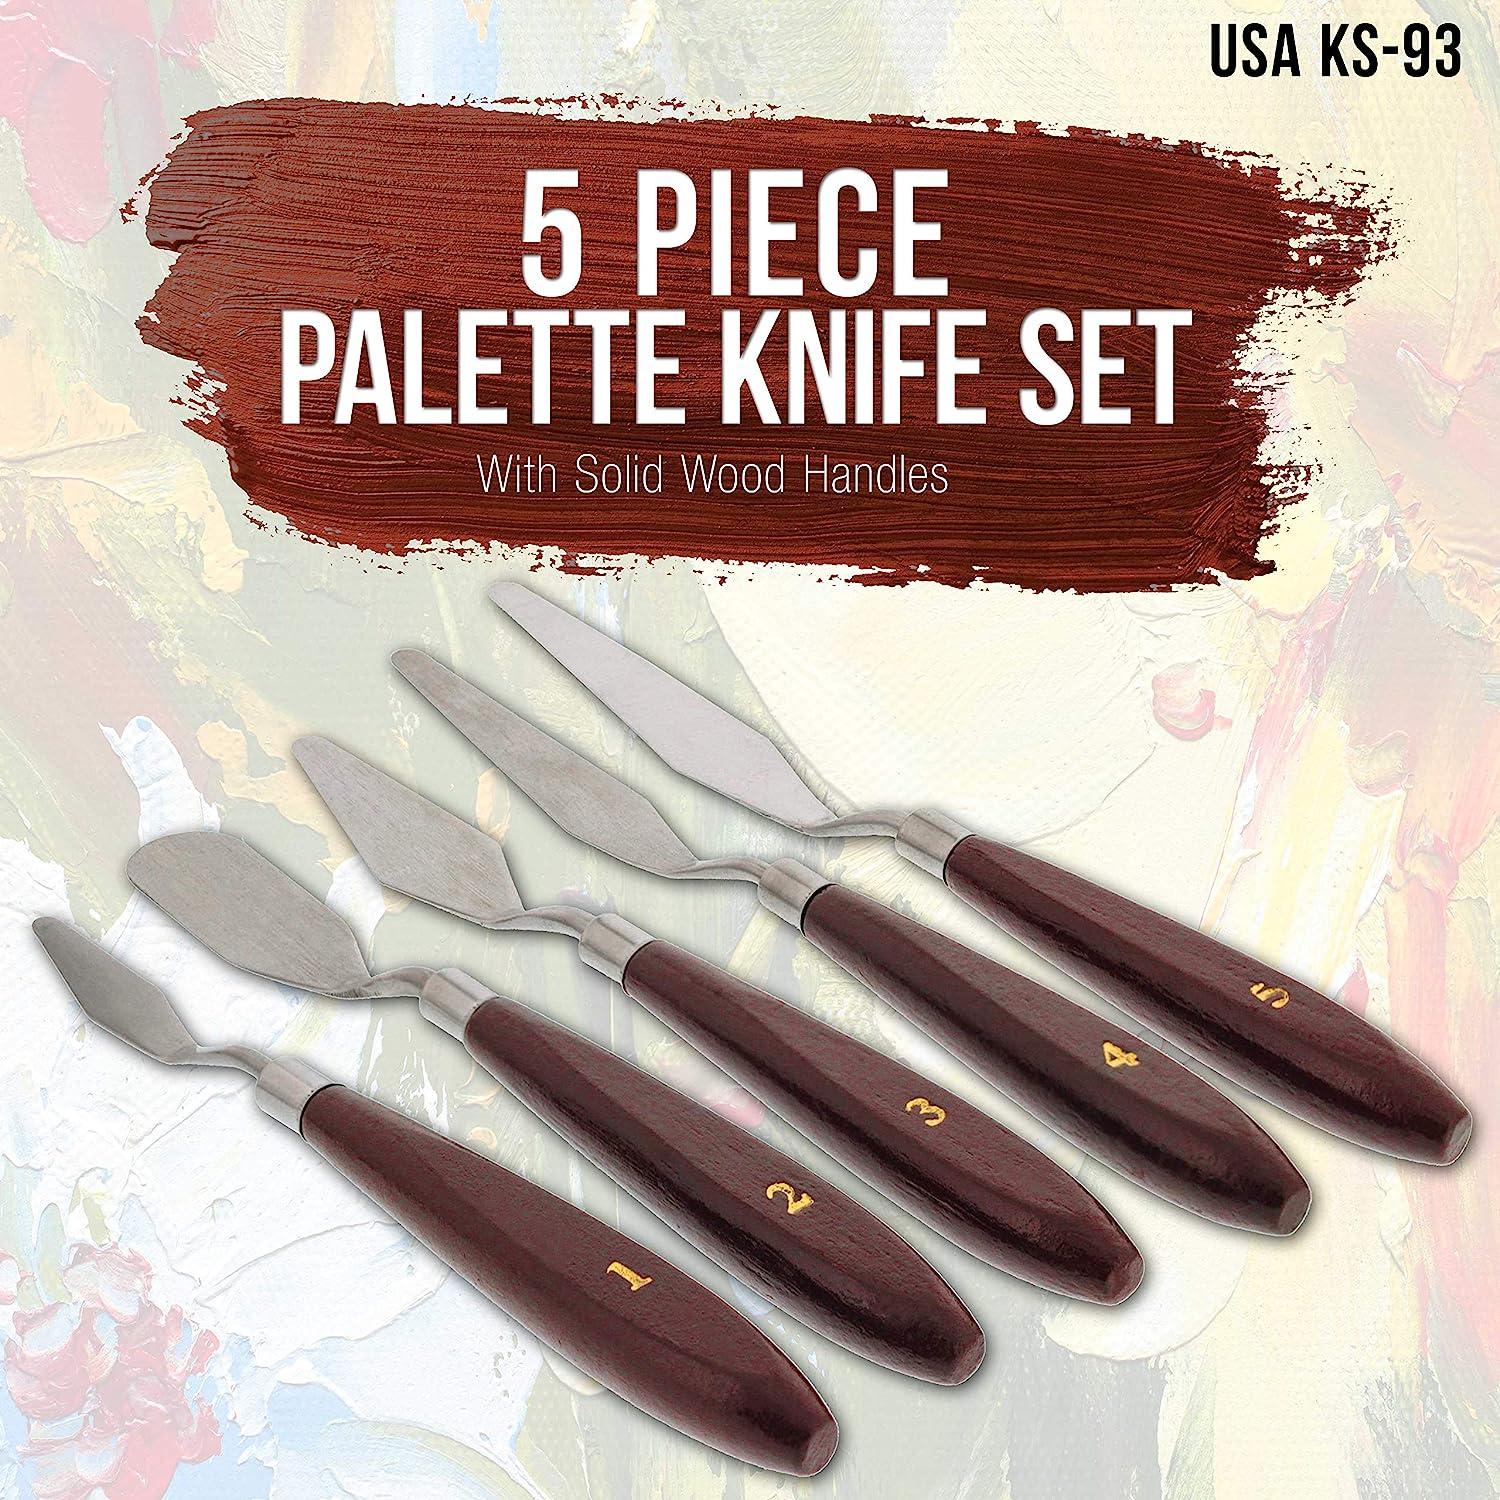 U.S. Art Supply 5-Piece Stainless Steel Palette Knife Set - Flexible  Spatula Painting Knives for Color Mixing, Spreading, Applying Oil & Acrylic  Paint on Canvases, Cake Icing, 3D Printer Removal Tool